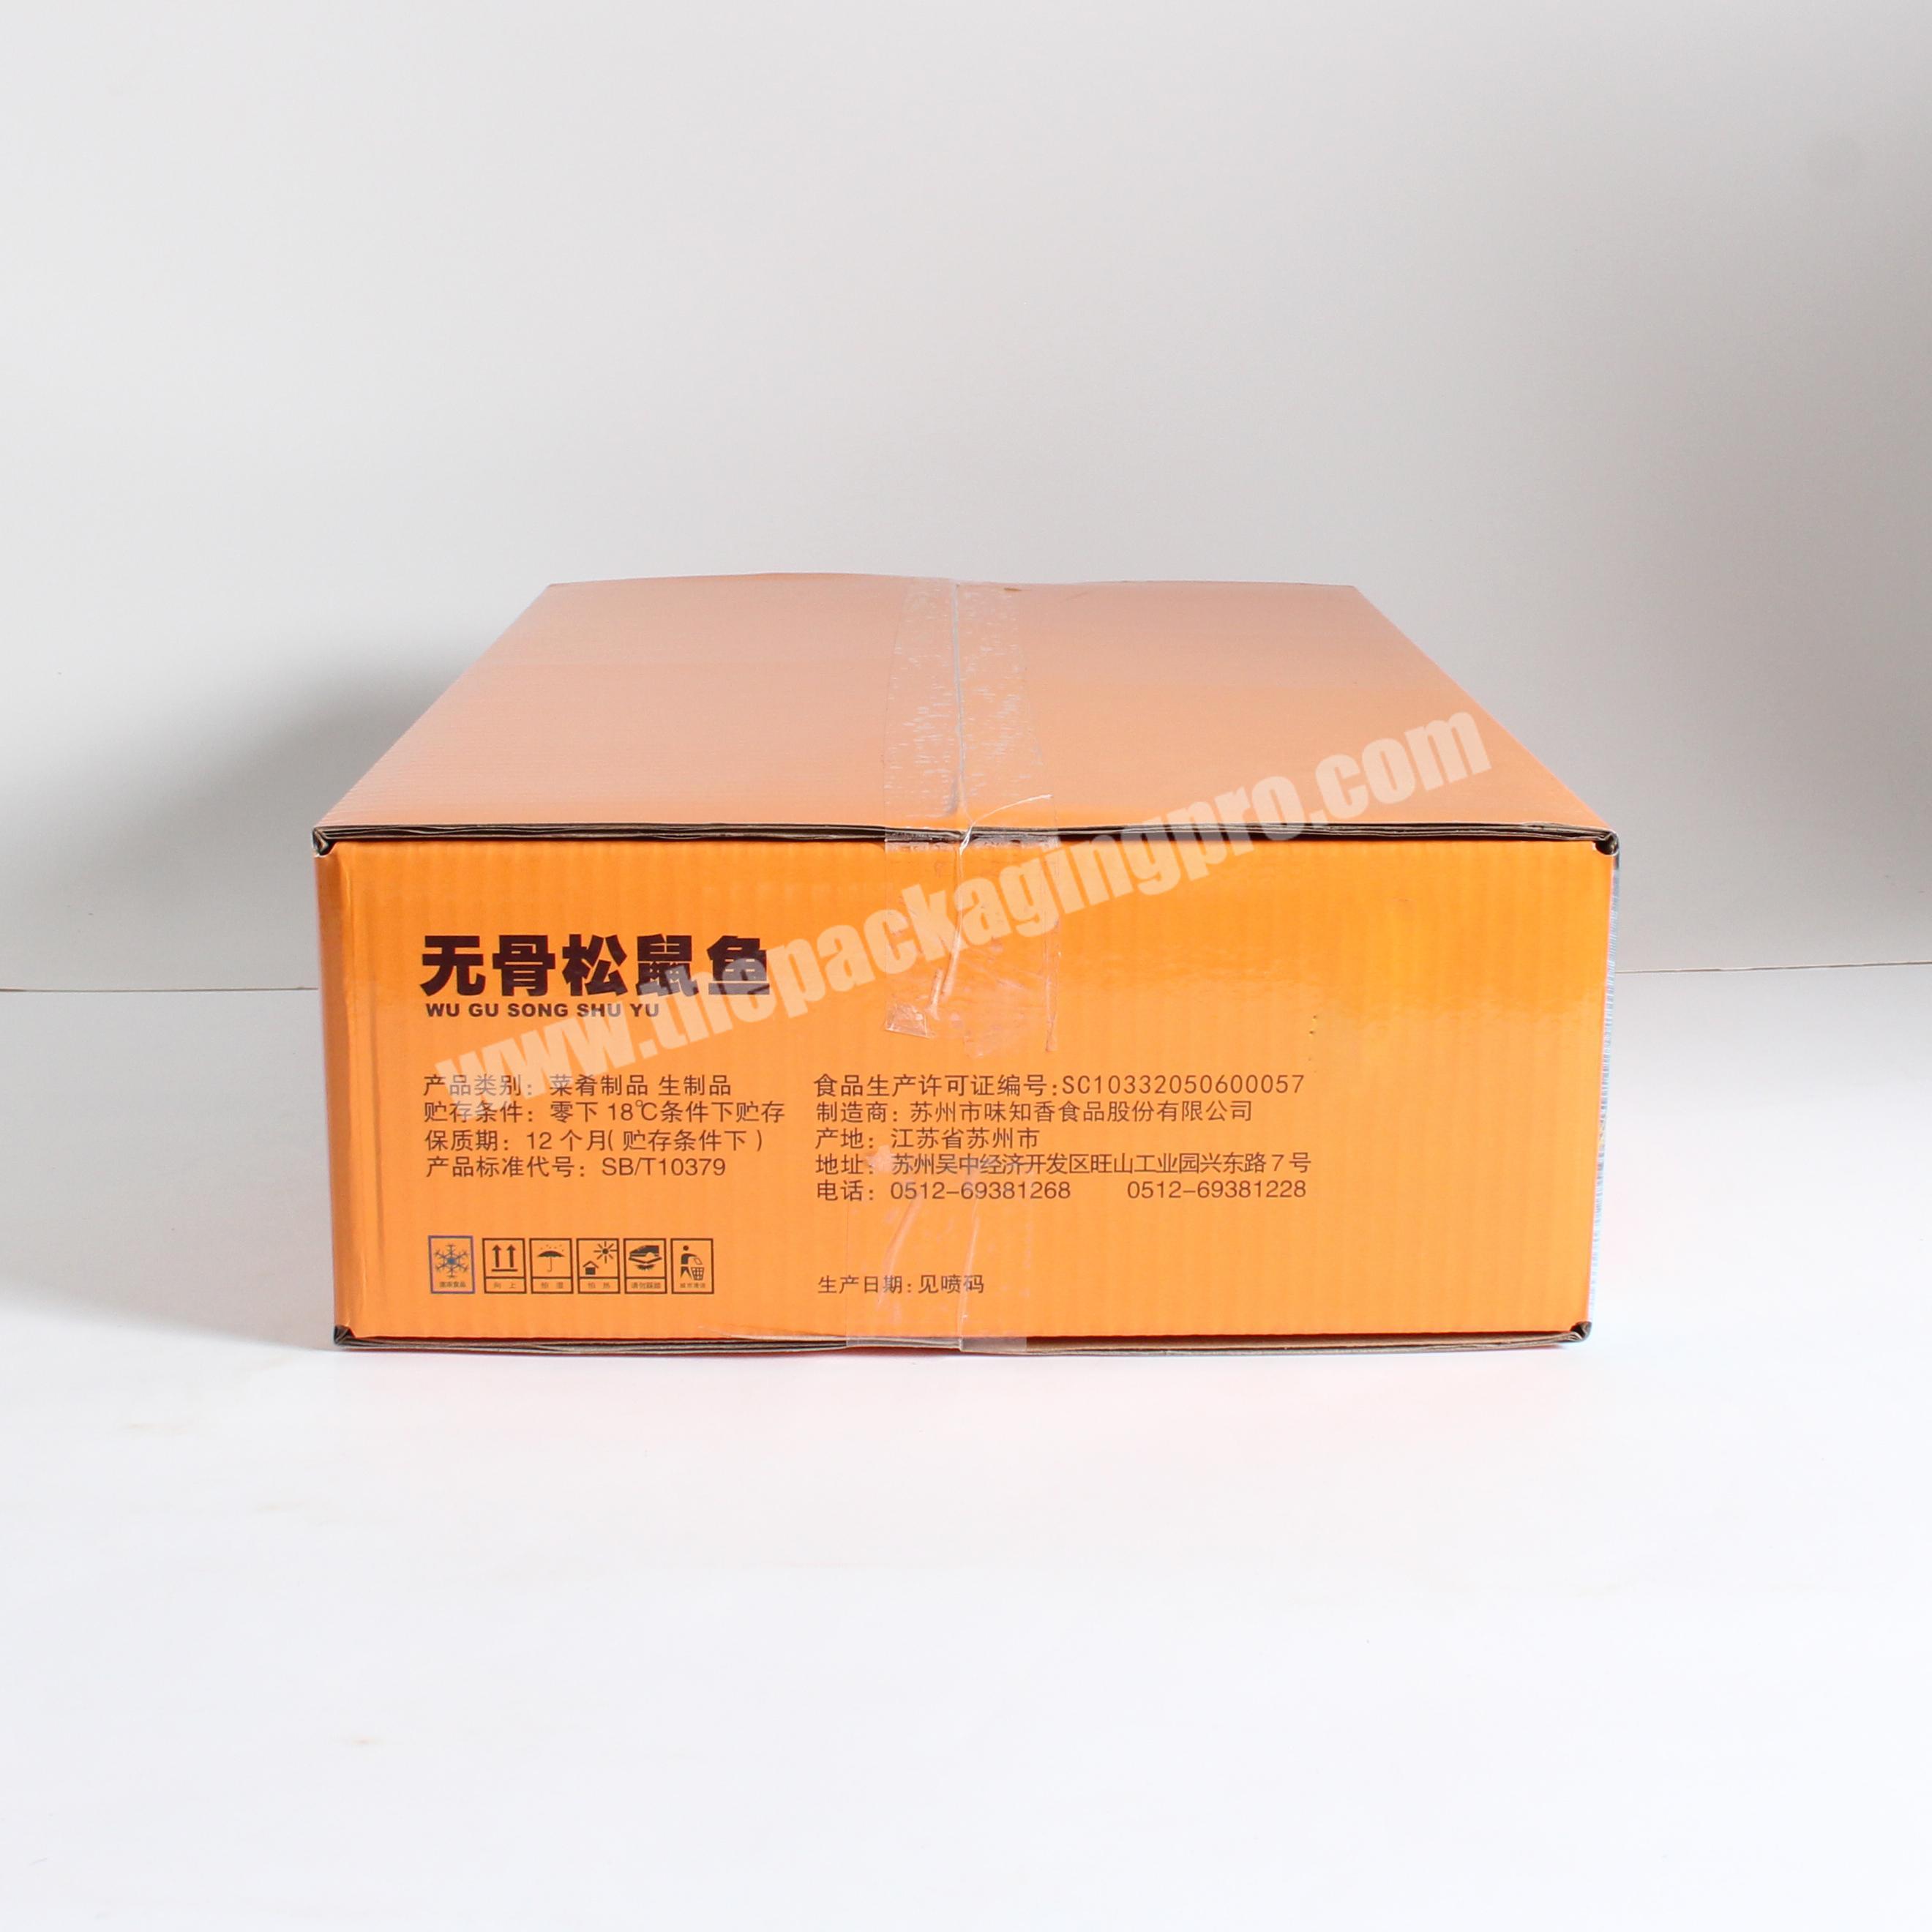 Jiangsu craft tissue paper box for food,carton lunch box for packaging